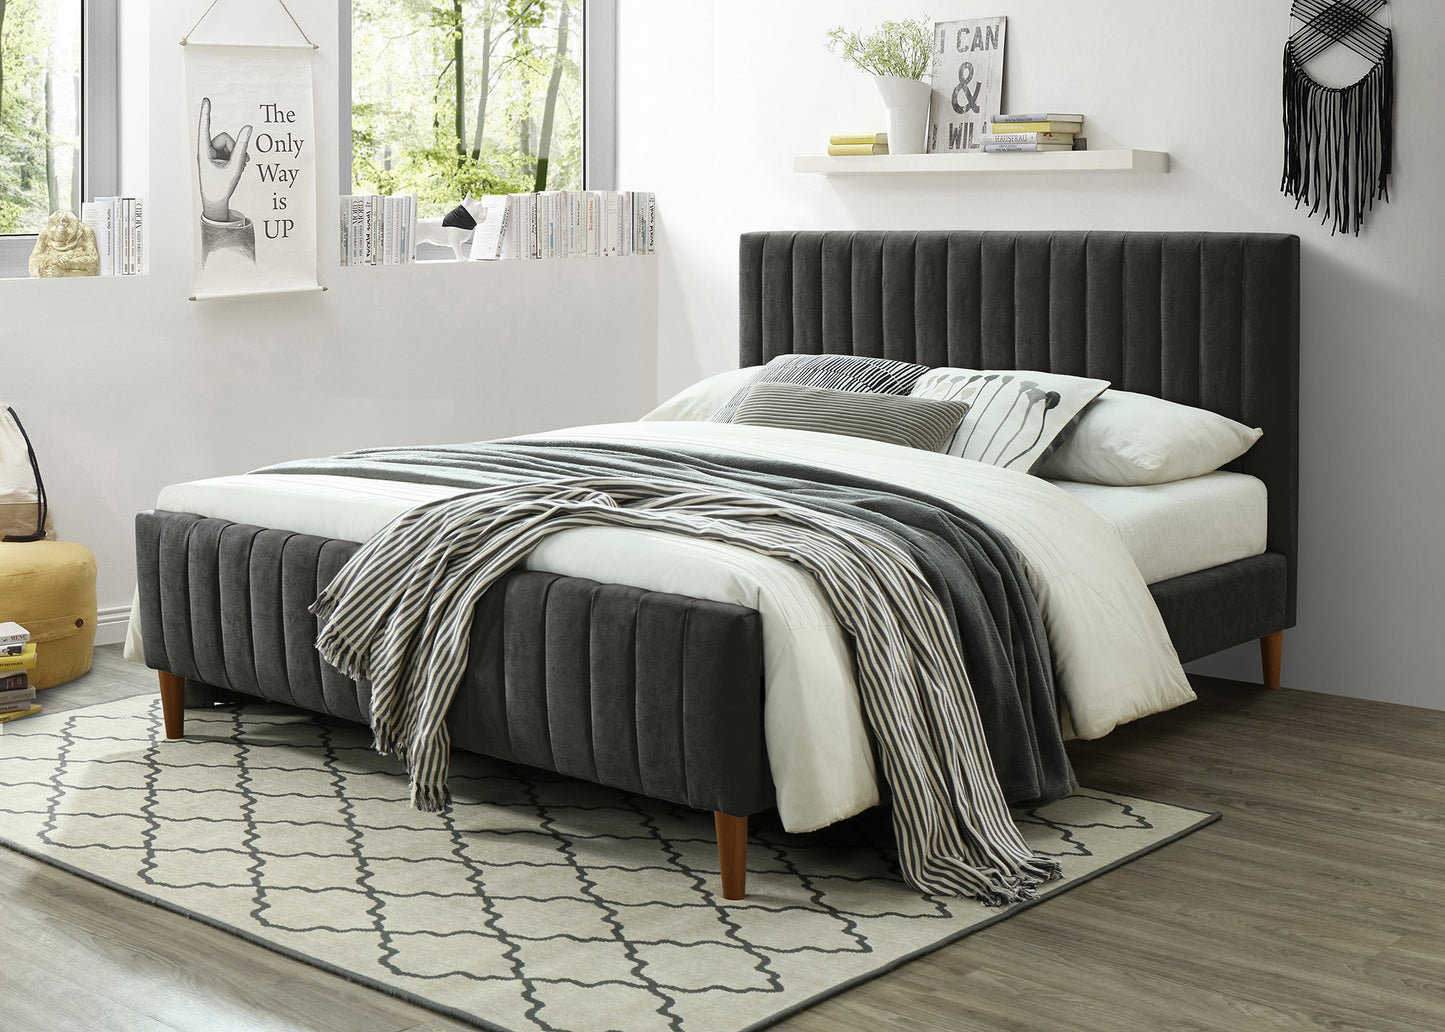 QUEEN SIZE- (HANNAH CHARCOAL)- FABRIC- BED FRAME- WITH SLATS